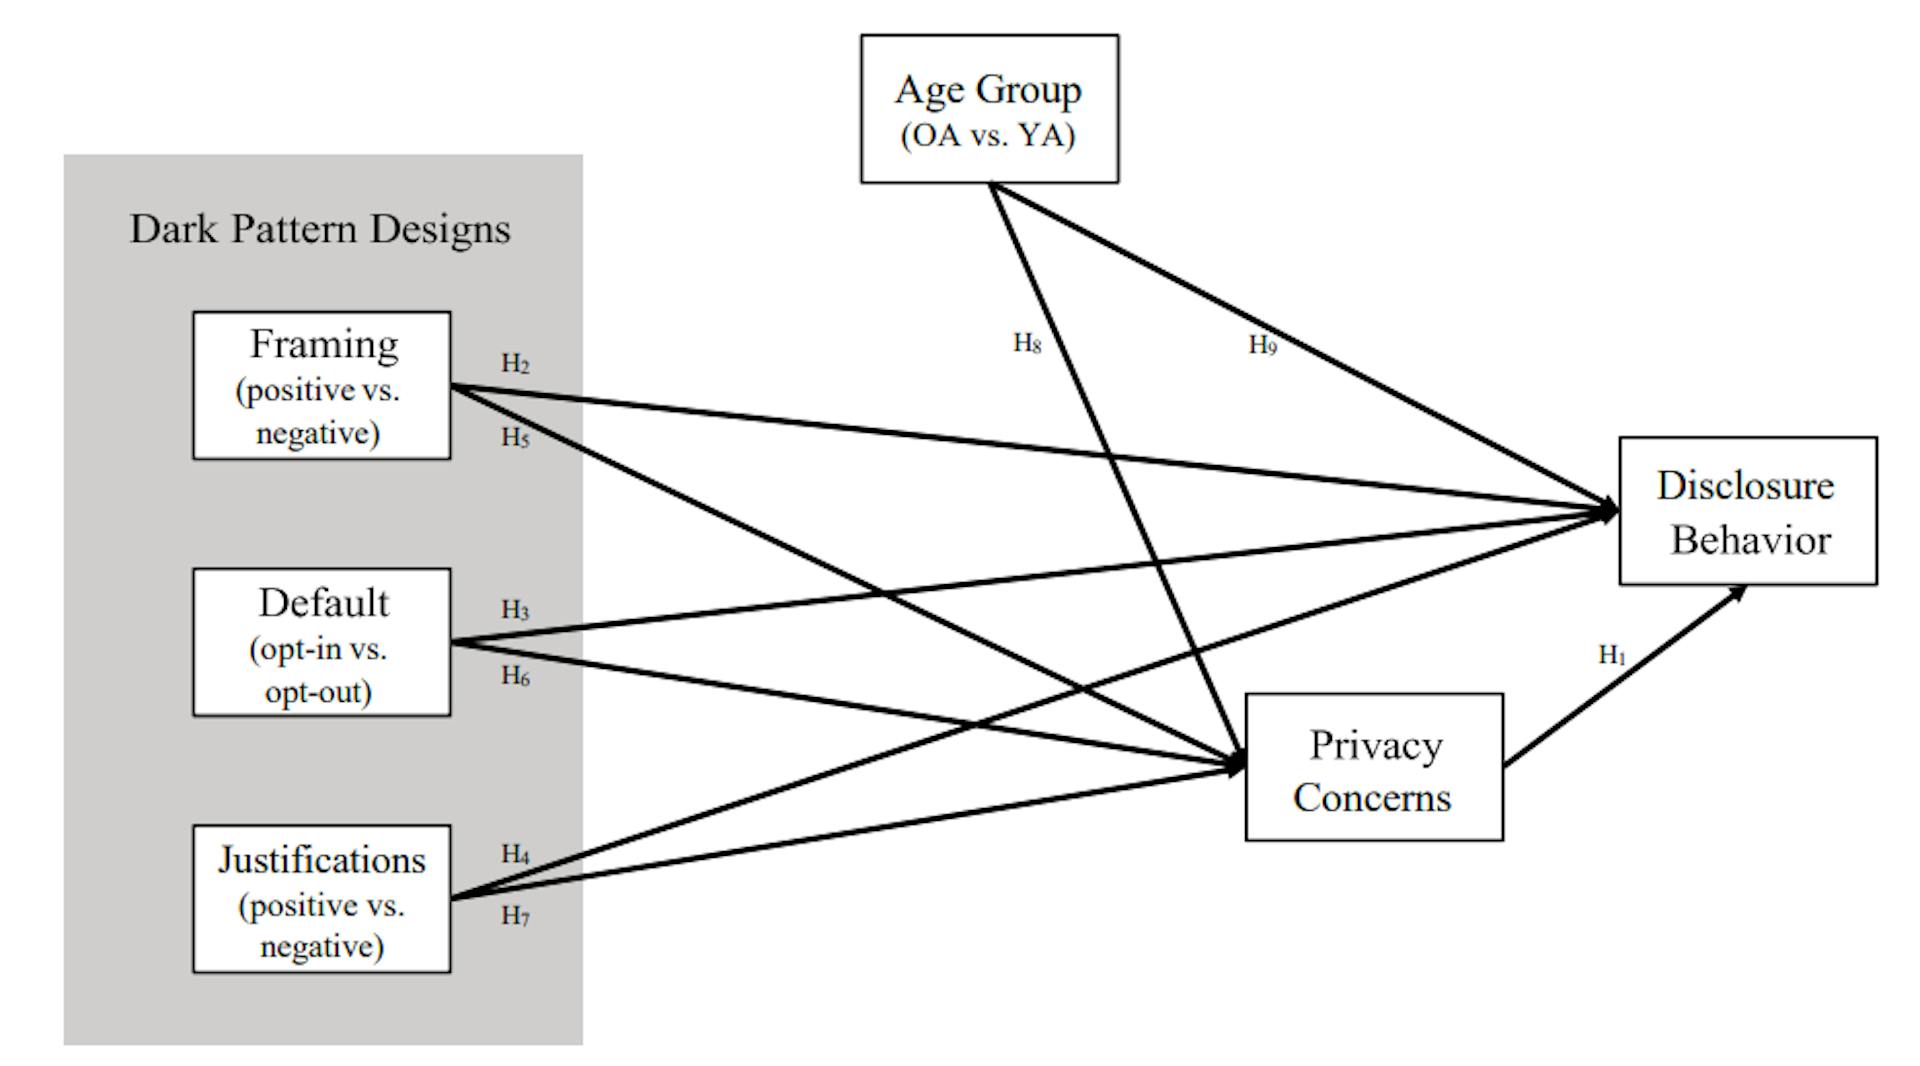 Fig. 1. Research model and the age-related effects of dark-pattern designs on privacy concerns and disclosure behavior (OA: older adults, YA: young adults).